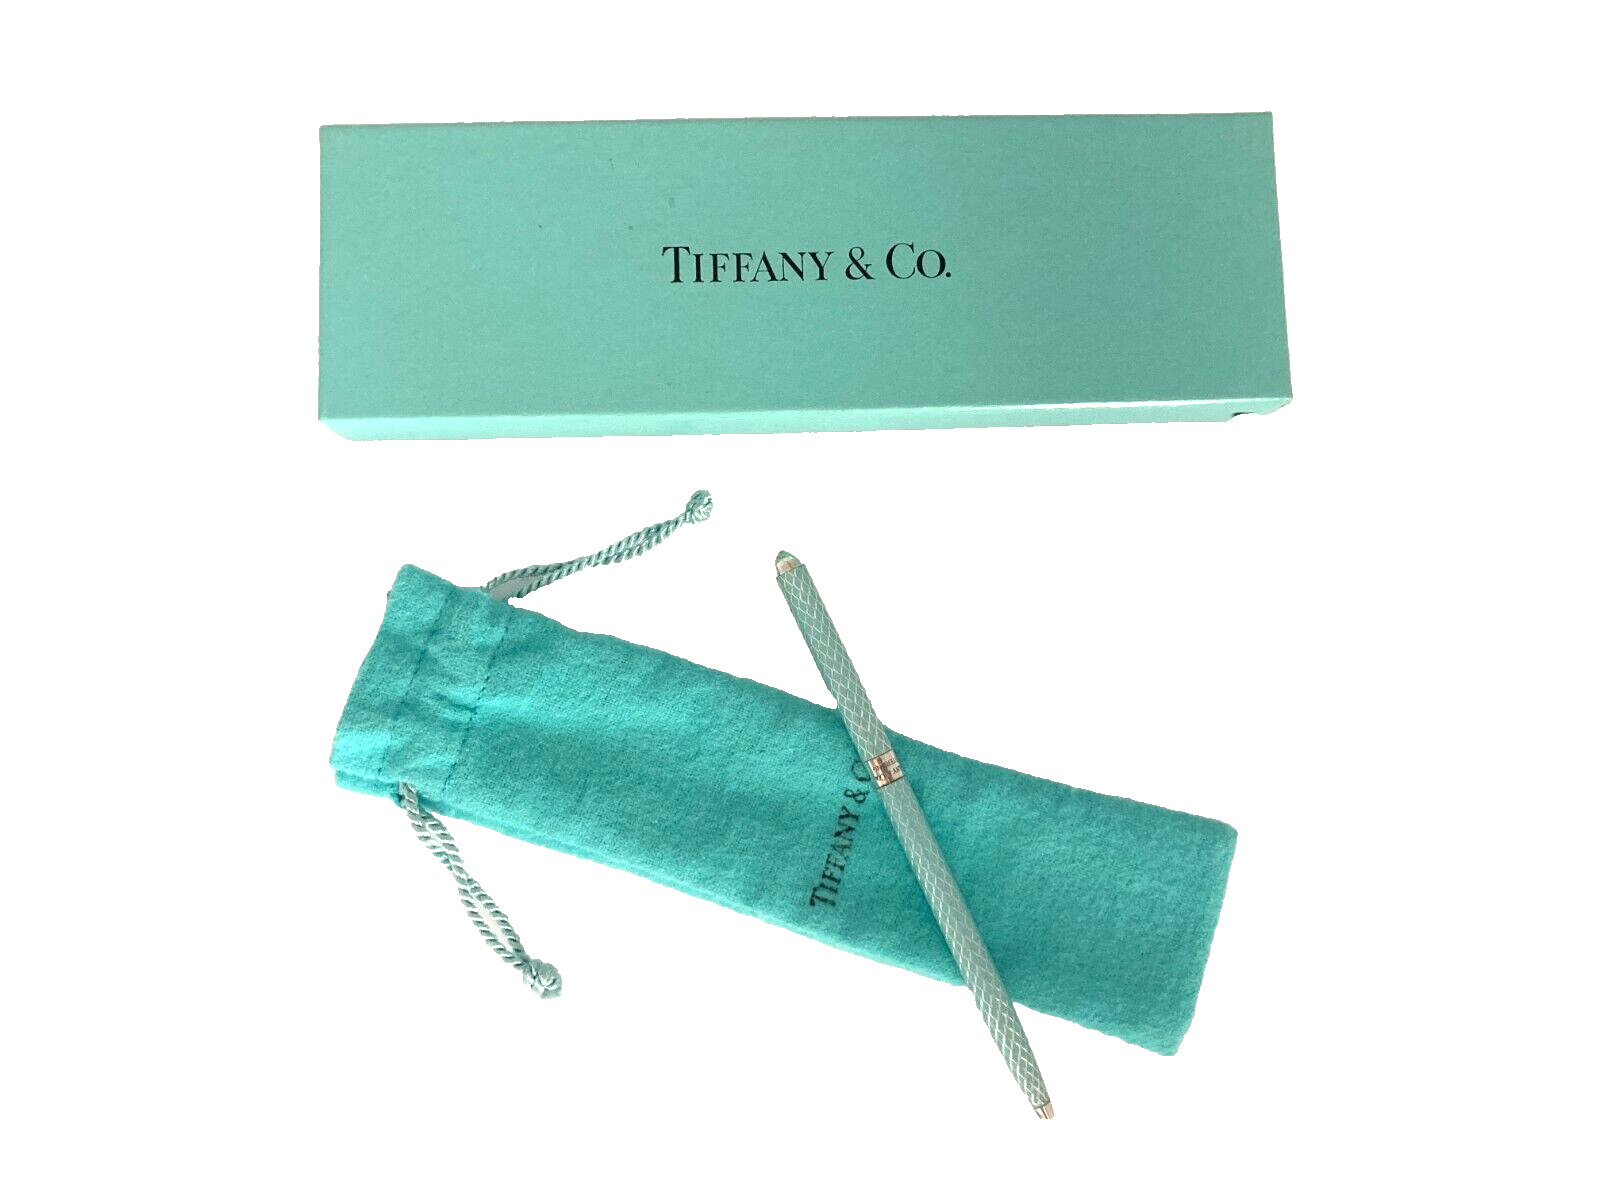 Vintage Tiffany & Co. Sterling Silver Ballpoint Purse Pen with Box and Dust Bag